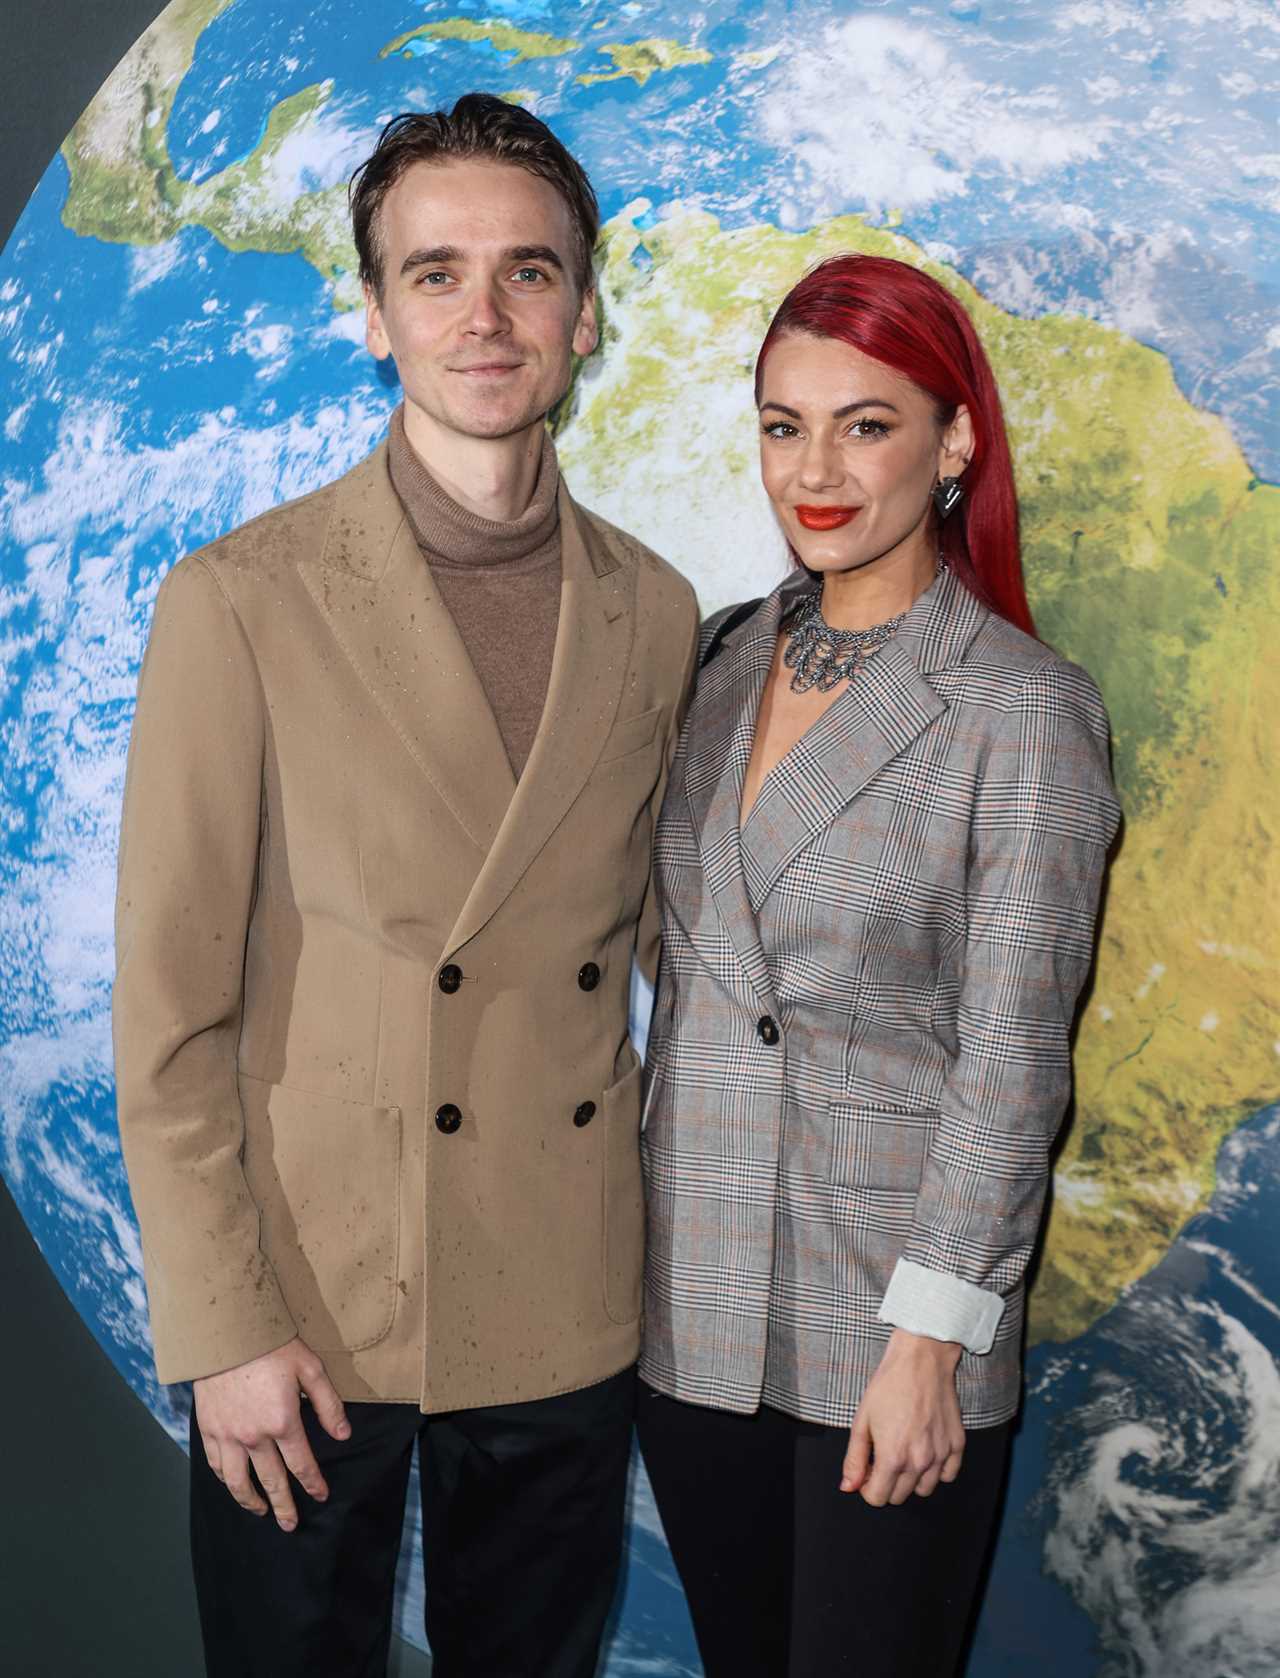 Strictly’s Dianne Buswell shows off huge garden at £1.3m home after putting it on sale with Joe Sugg